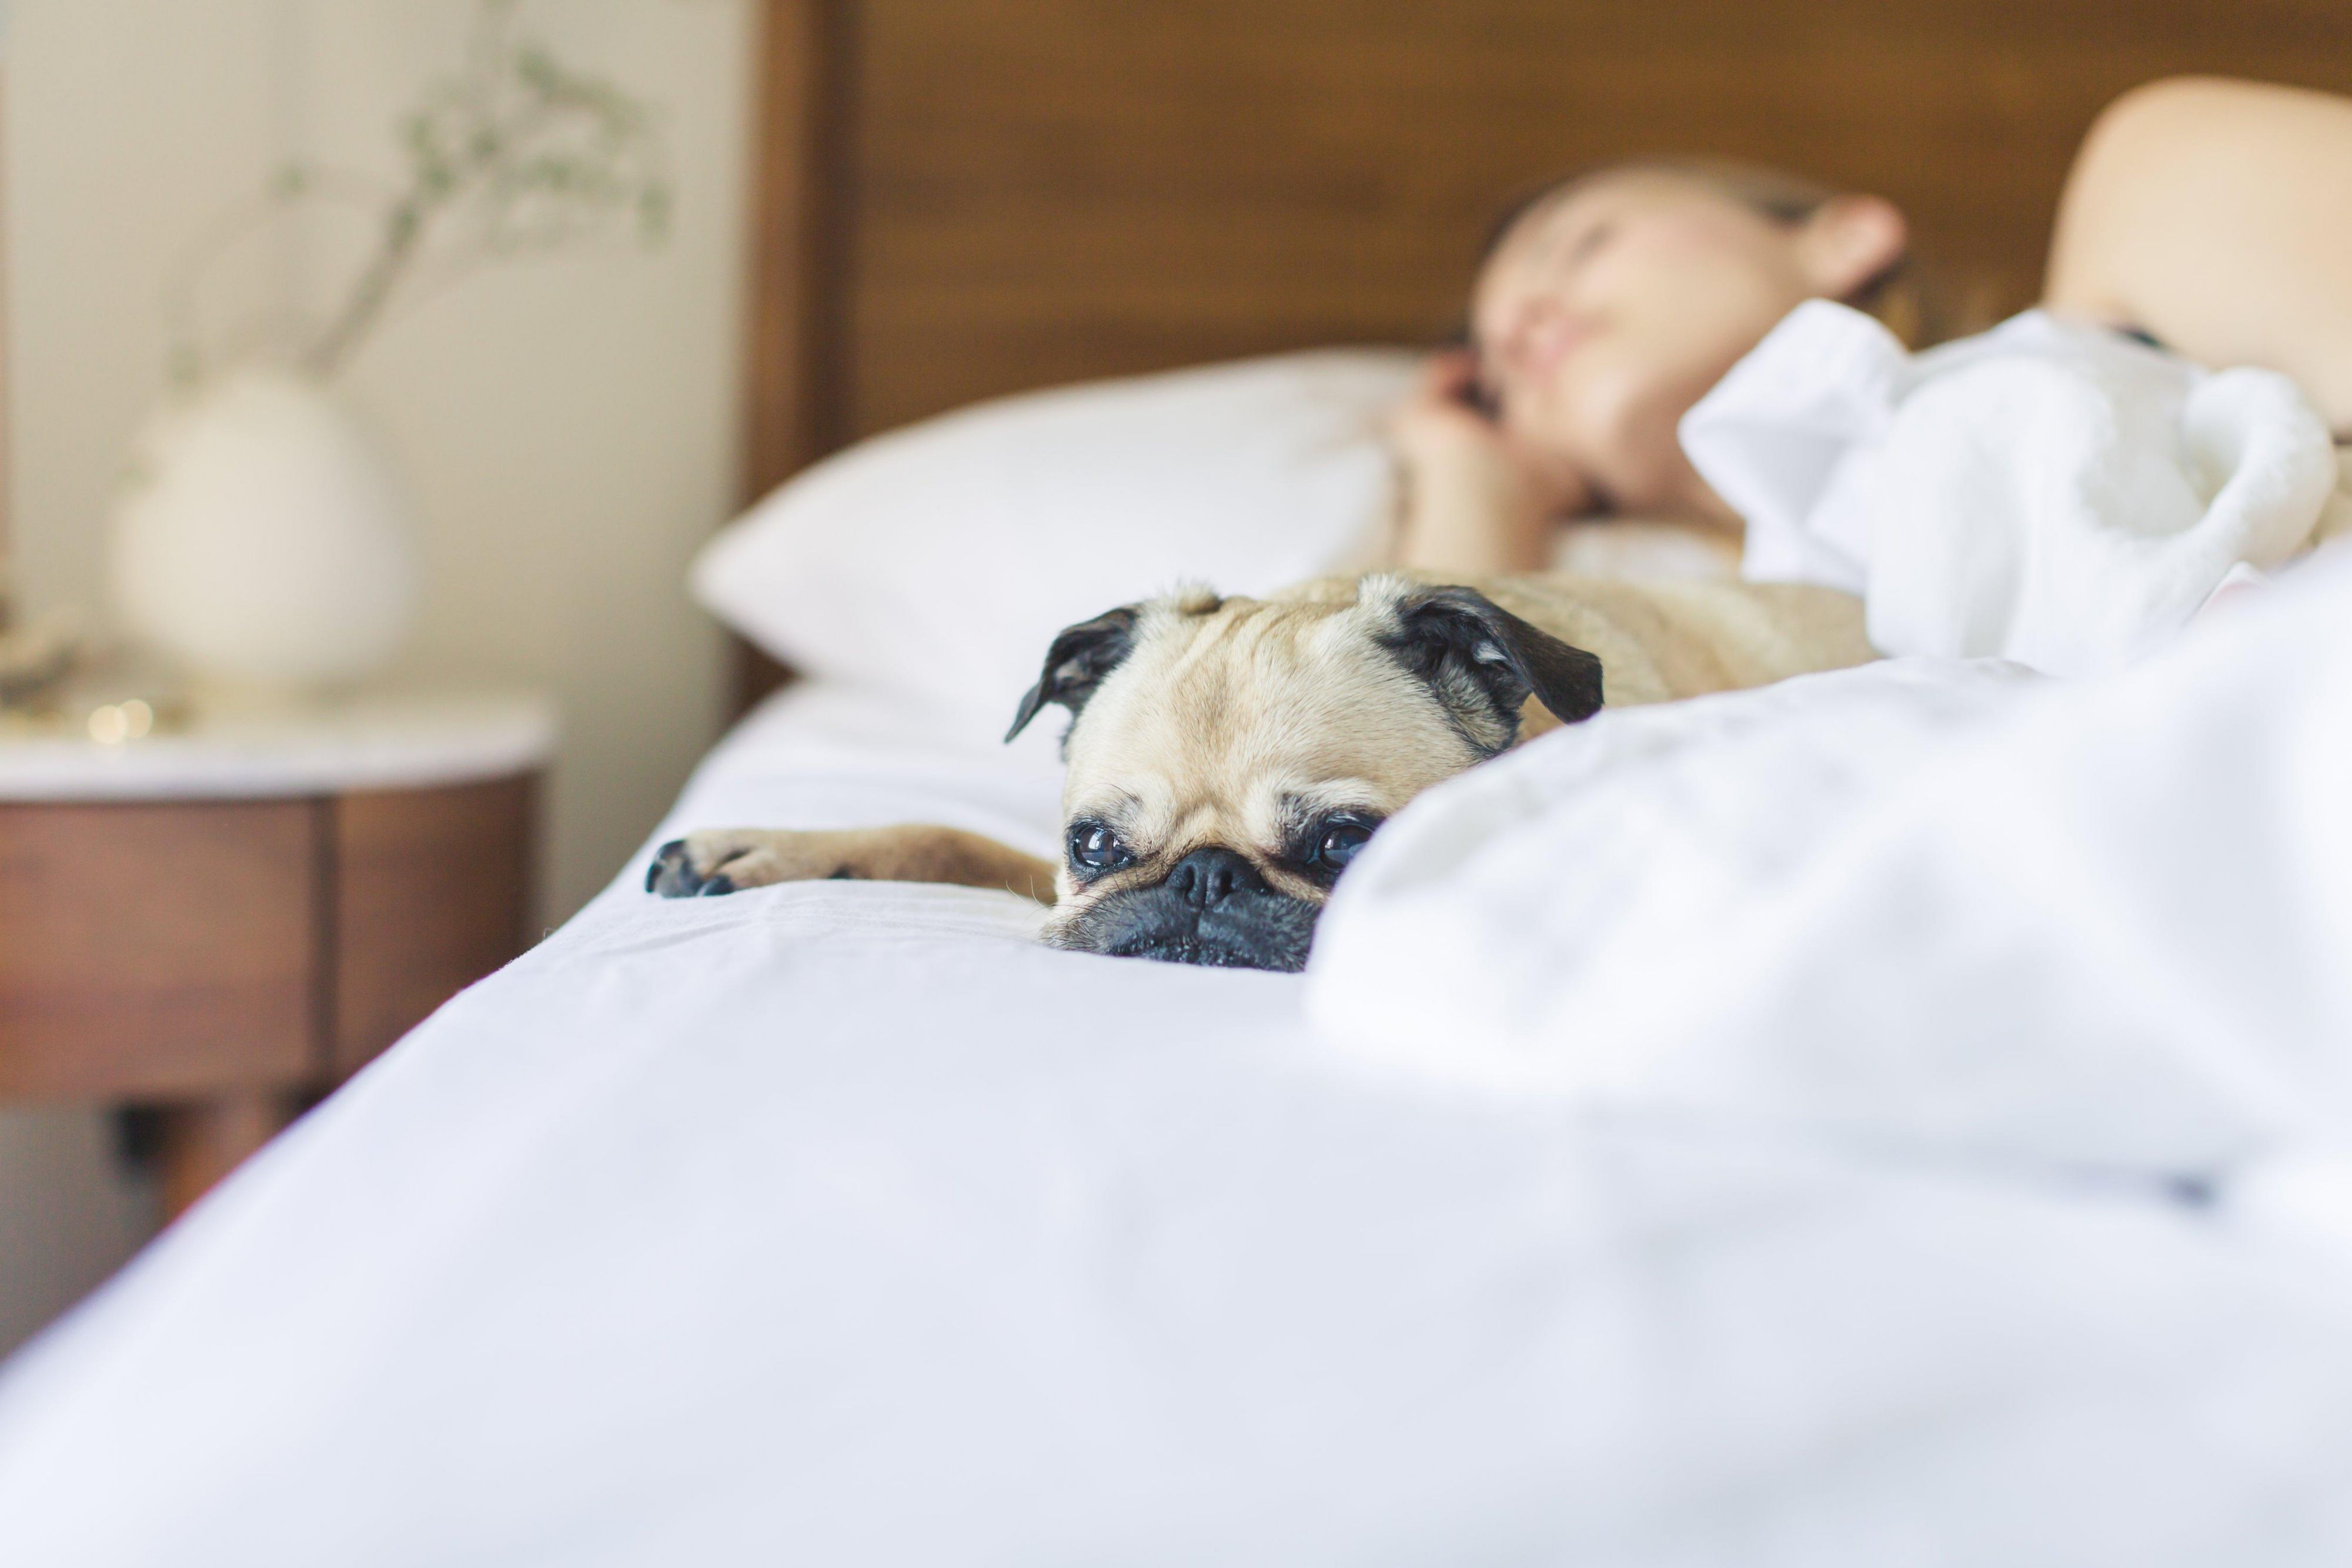 Don't let your furry friend miss out on all the exciting sights and sounds of Reno during your extended stay at Staybridge Suites Reno. We charge a non-refundable pet fee of $50. The nearest dog park is less than 10 minutes away from our hotel.